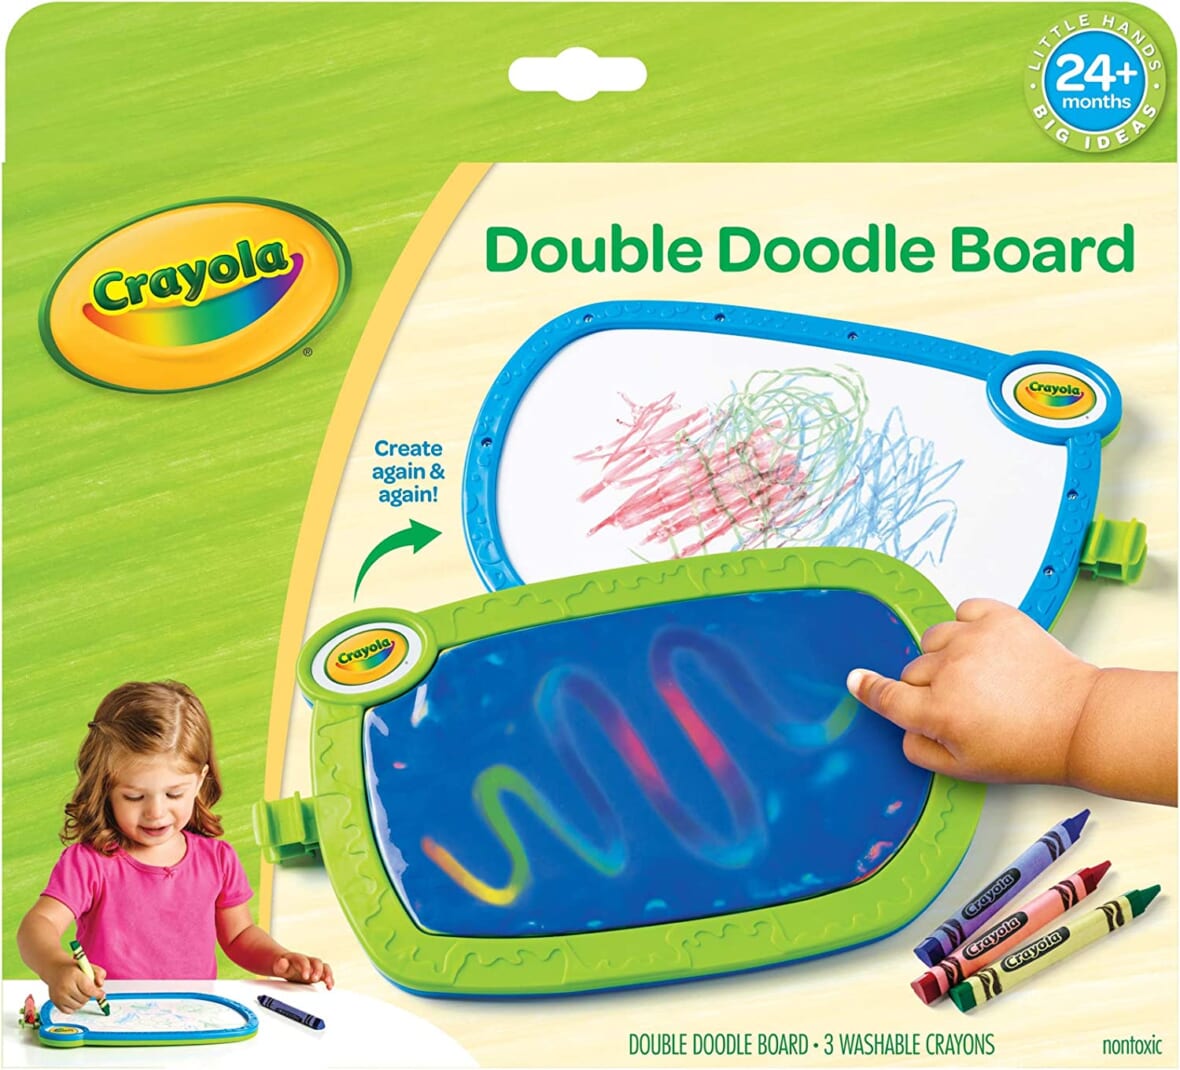 Best toys for 15 month old babies: Crayola doodle board